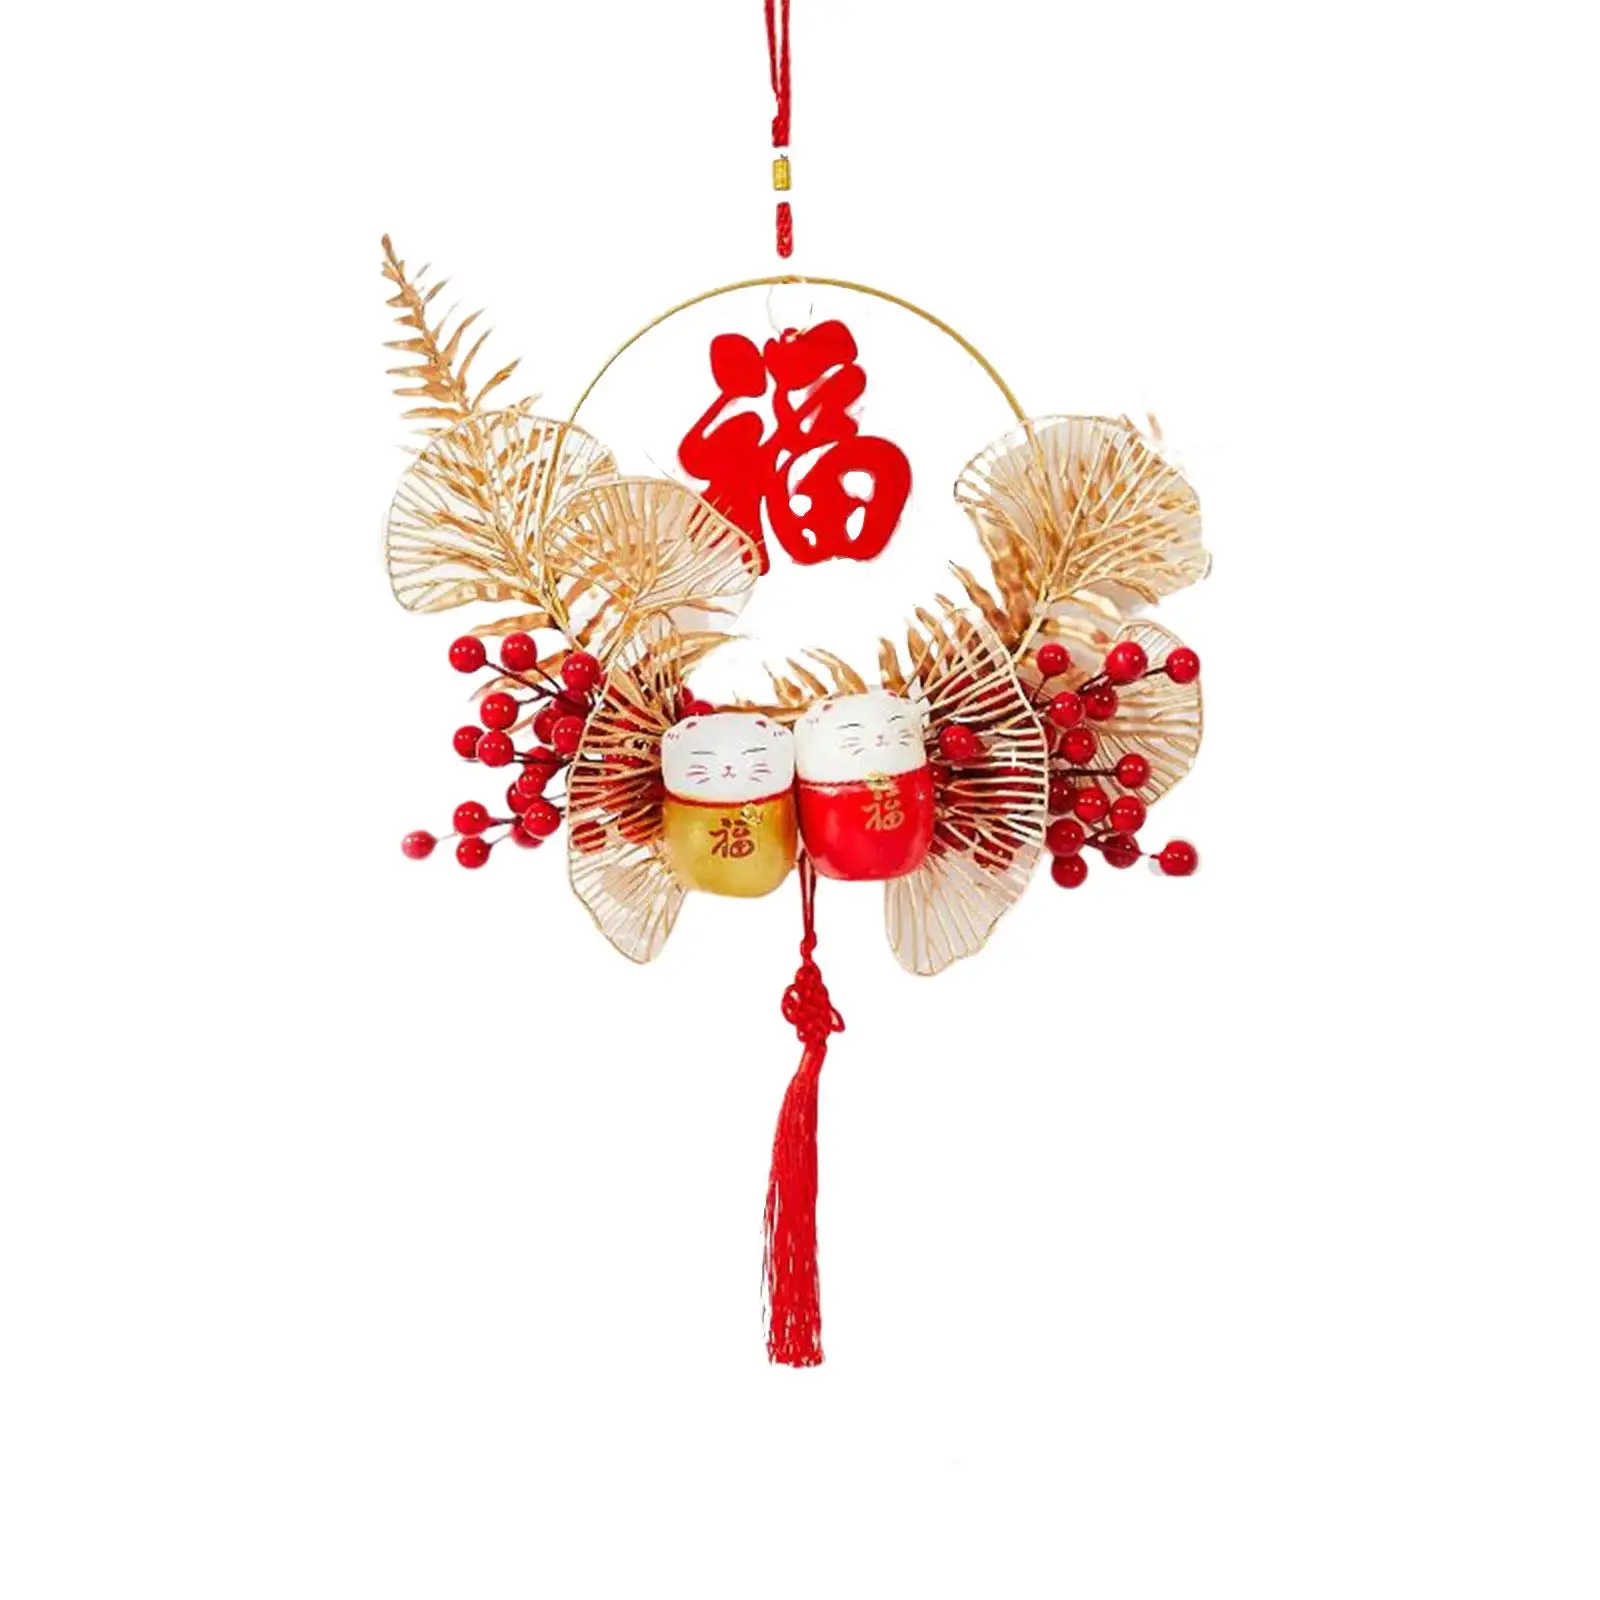 Novelty Chinese Wreath Hanging Garland with Tassel New Year Decoration Chinese Pendant for Window Door Living Room Home Decor